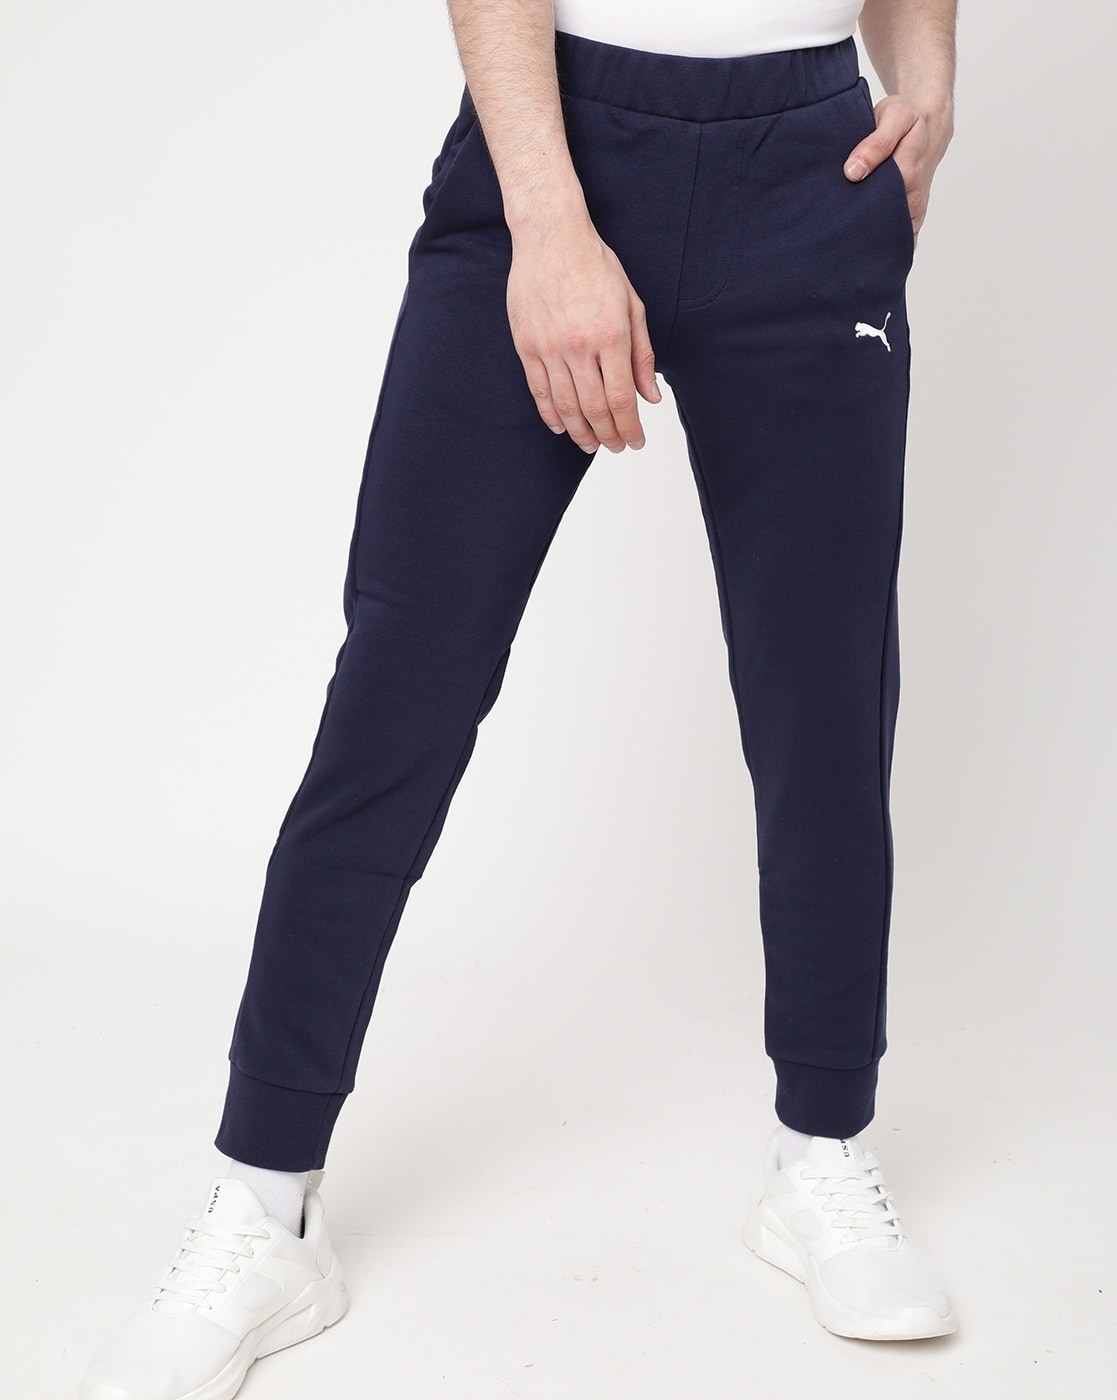 Sweatpants vs Joggers Whats The Difference  Mens Fitness UK